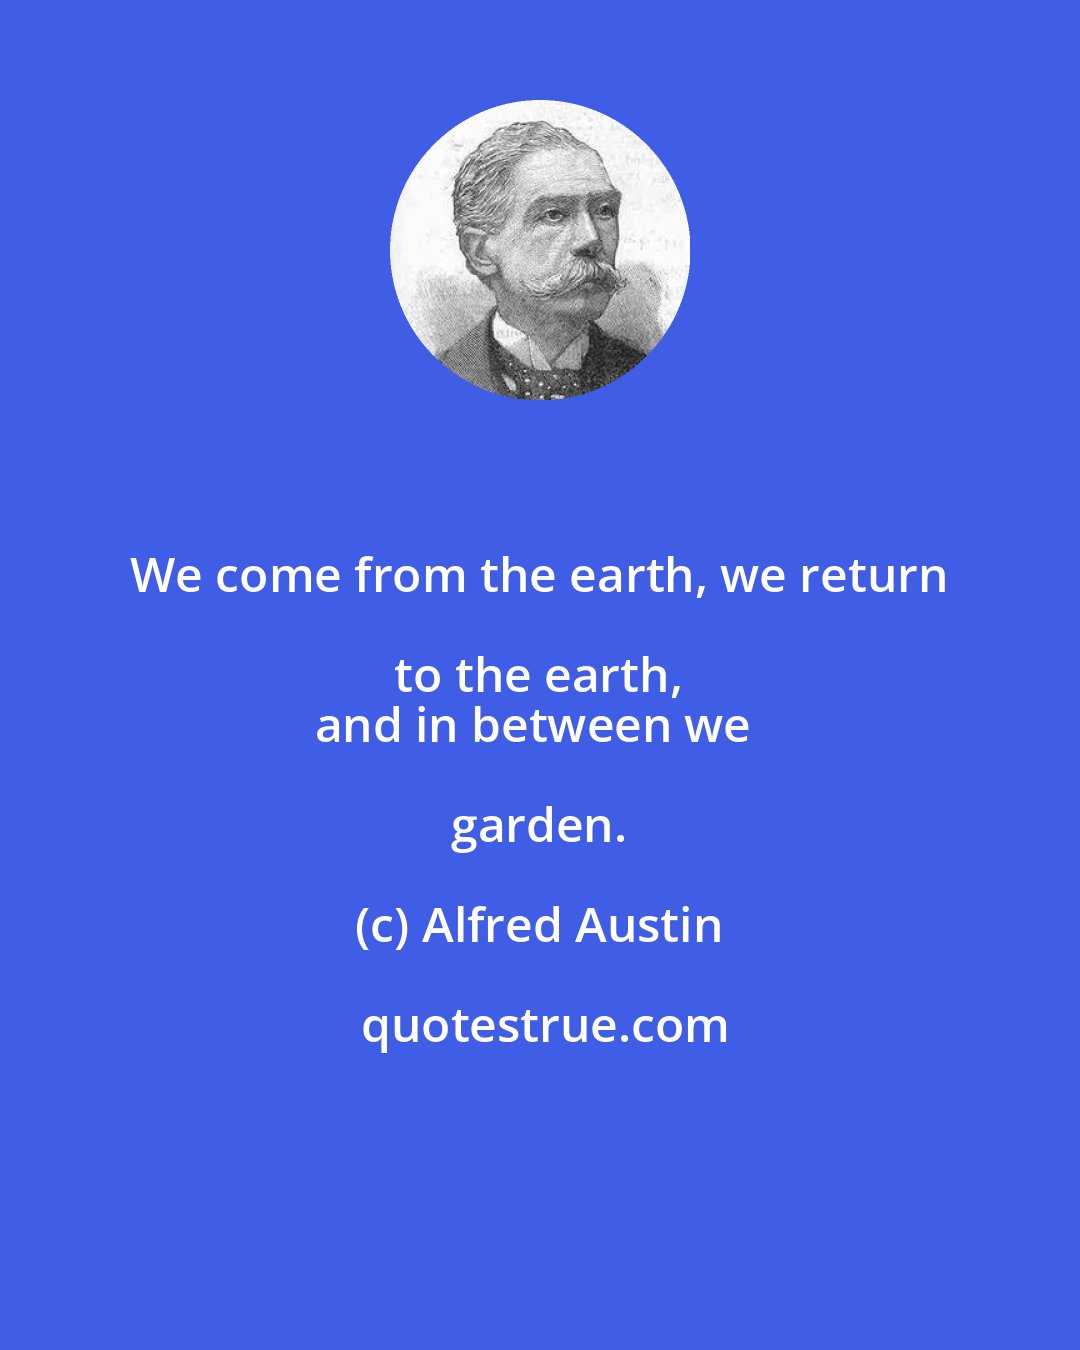 Alfred Austin: We come from the earth, we return to the earth, 
and in between we garden.